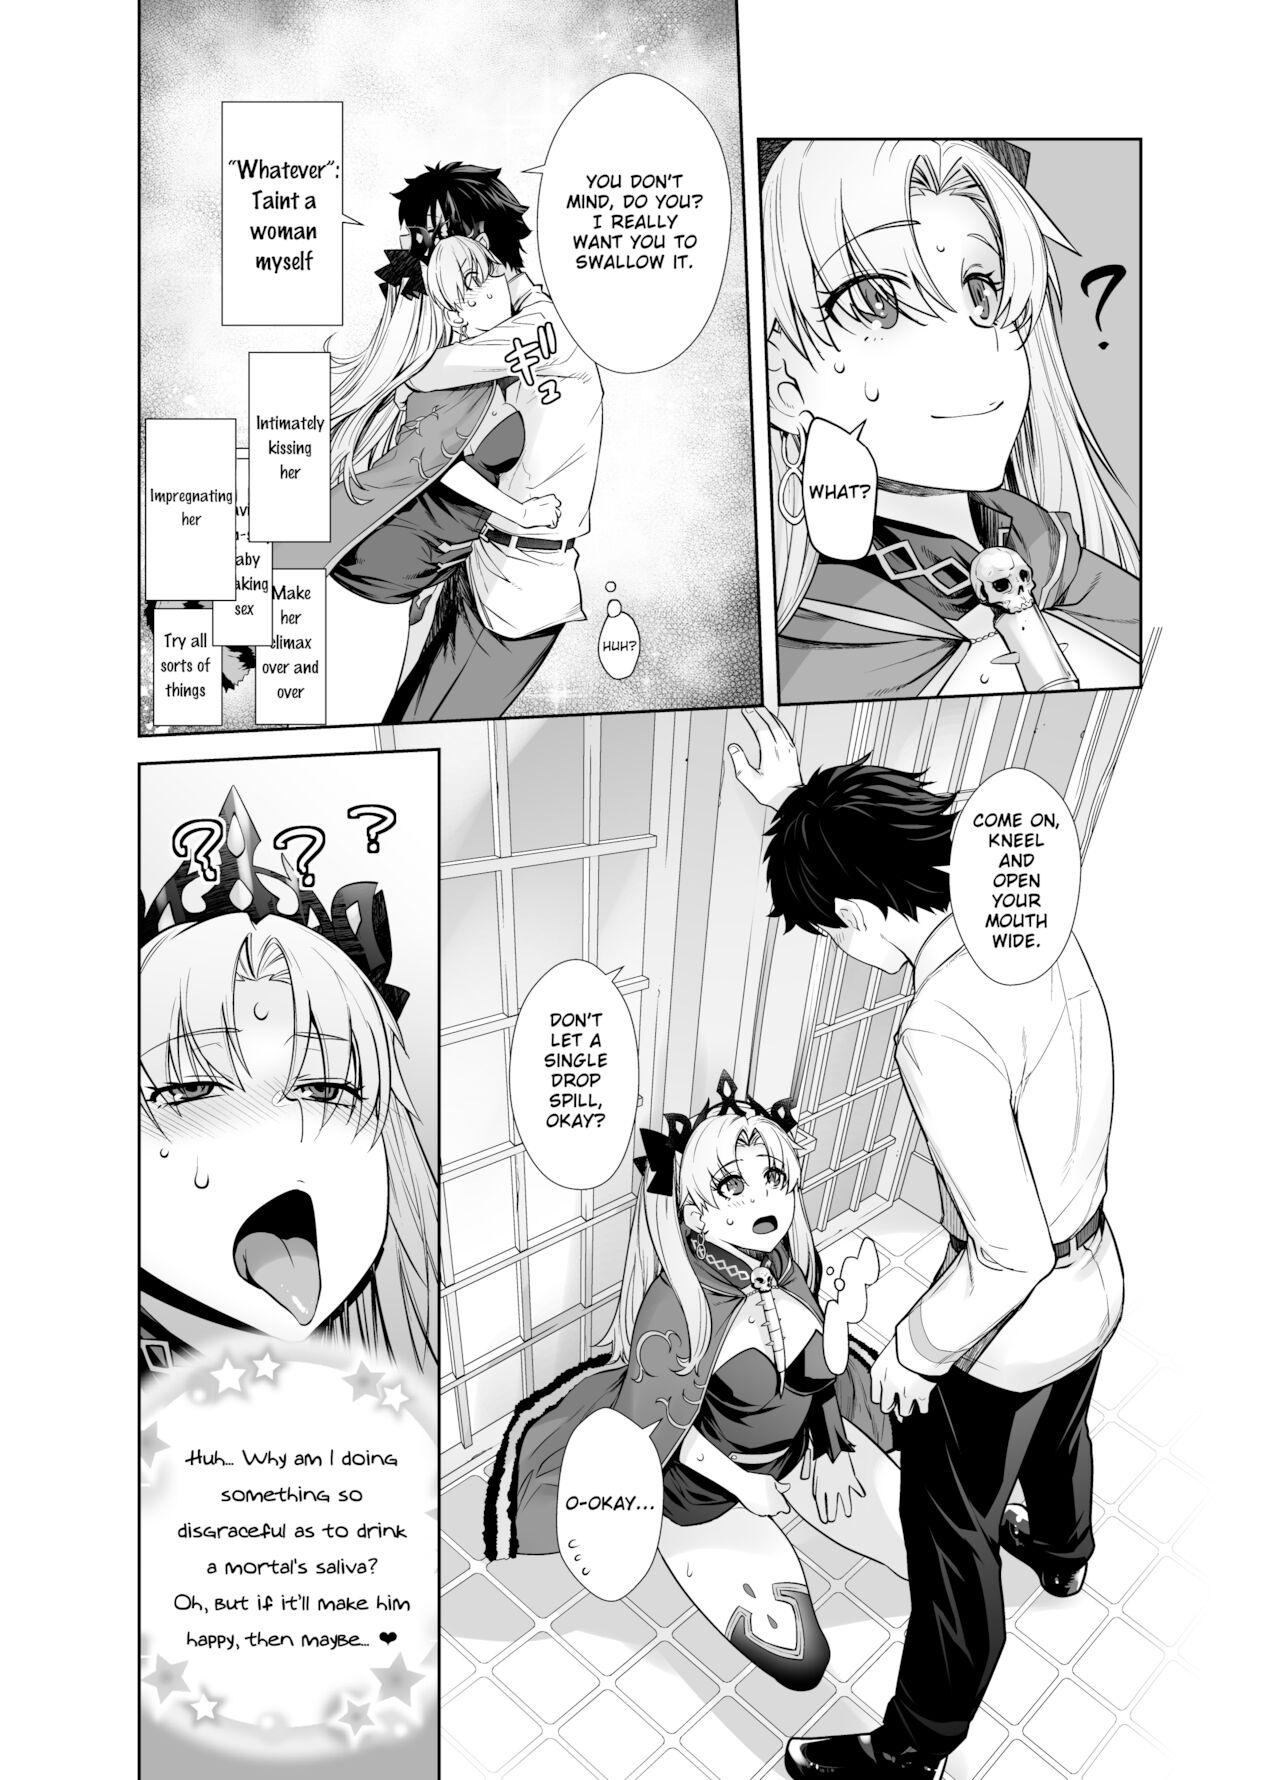 Amateurs HEAVEN'S DRIVE 9 - Fate grand order Family Taboo - Page 7